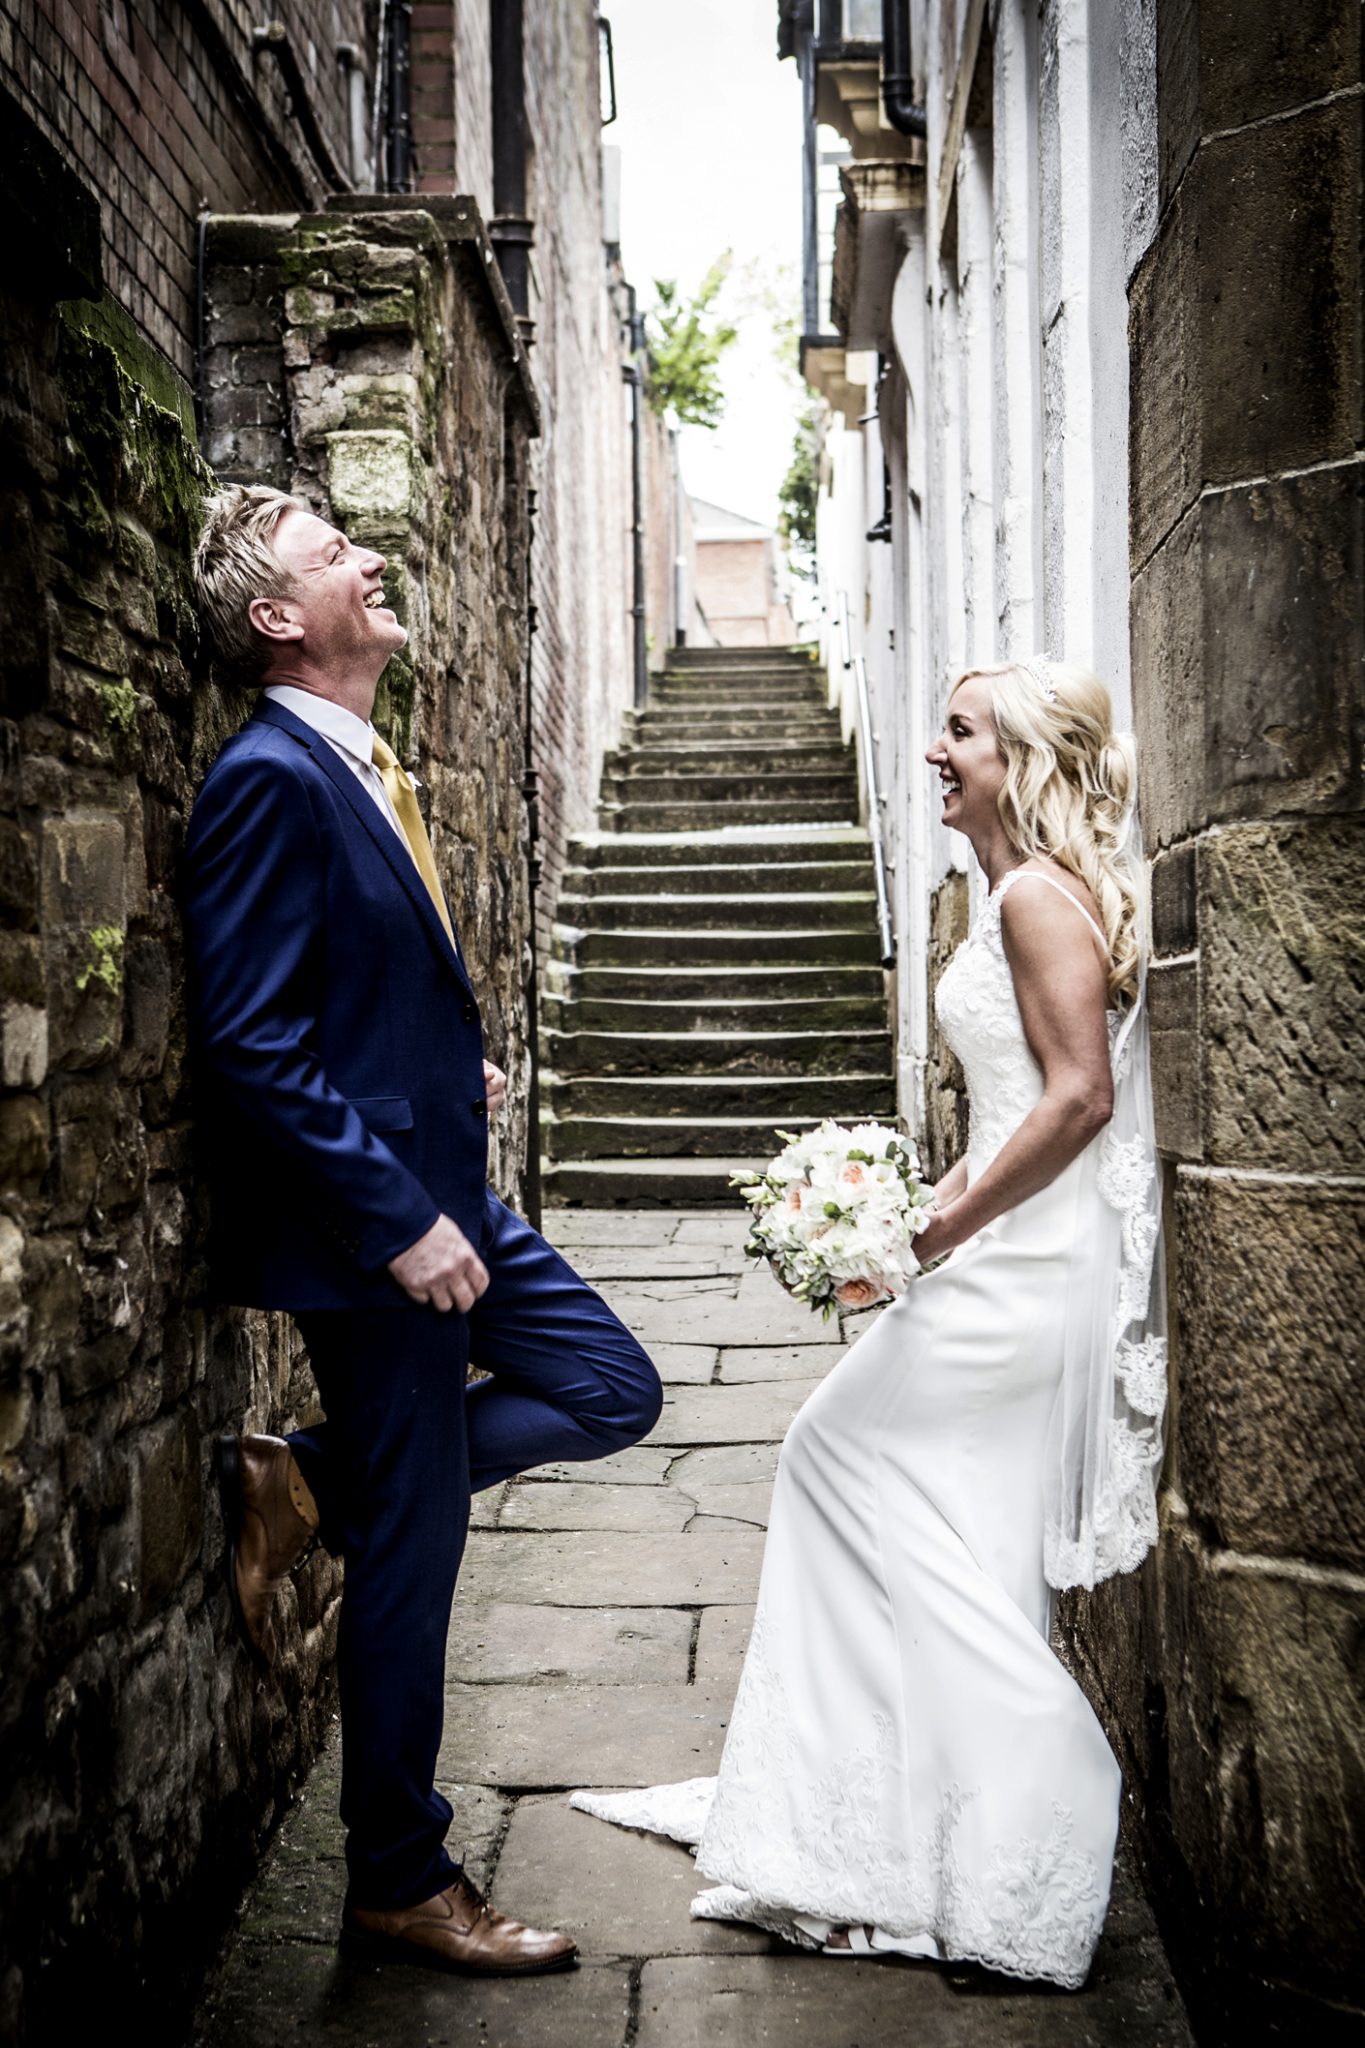 wedding-photography-of-the-bride-and-groom-at-The-Belle-Epoque-Hotel-Cheshire